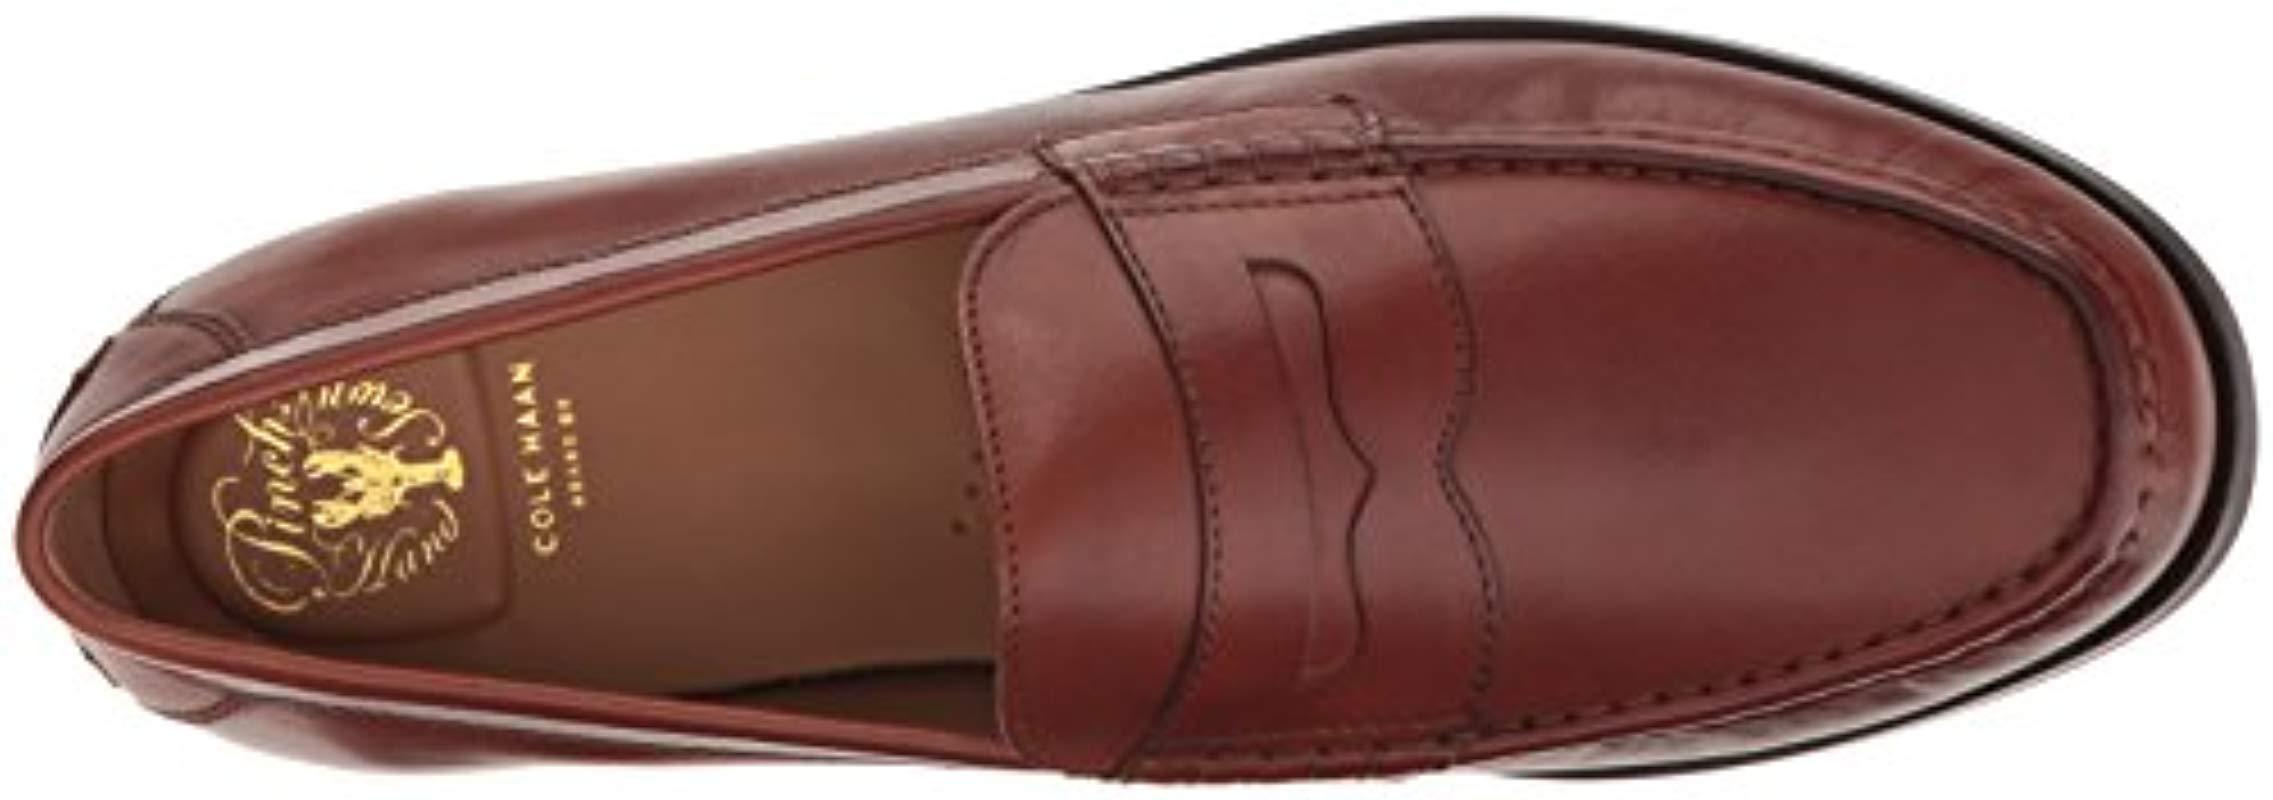 cole haan men's pinch friday contemporary penny loafer